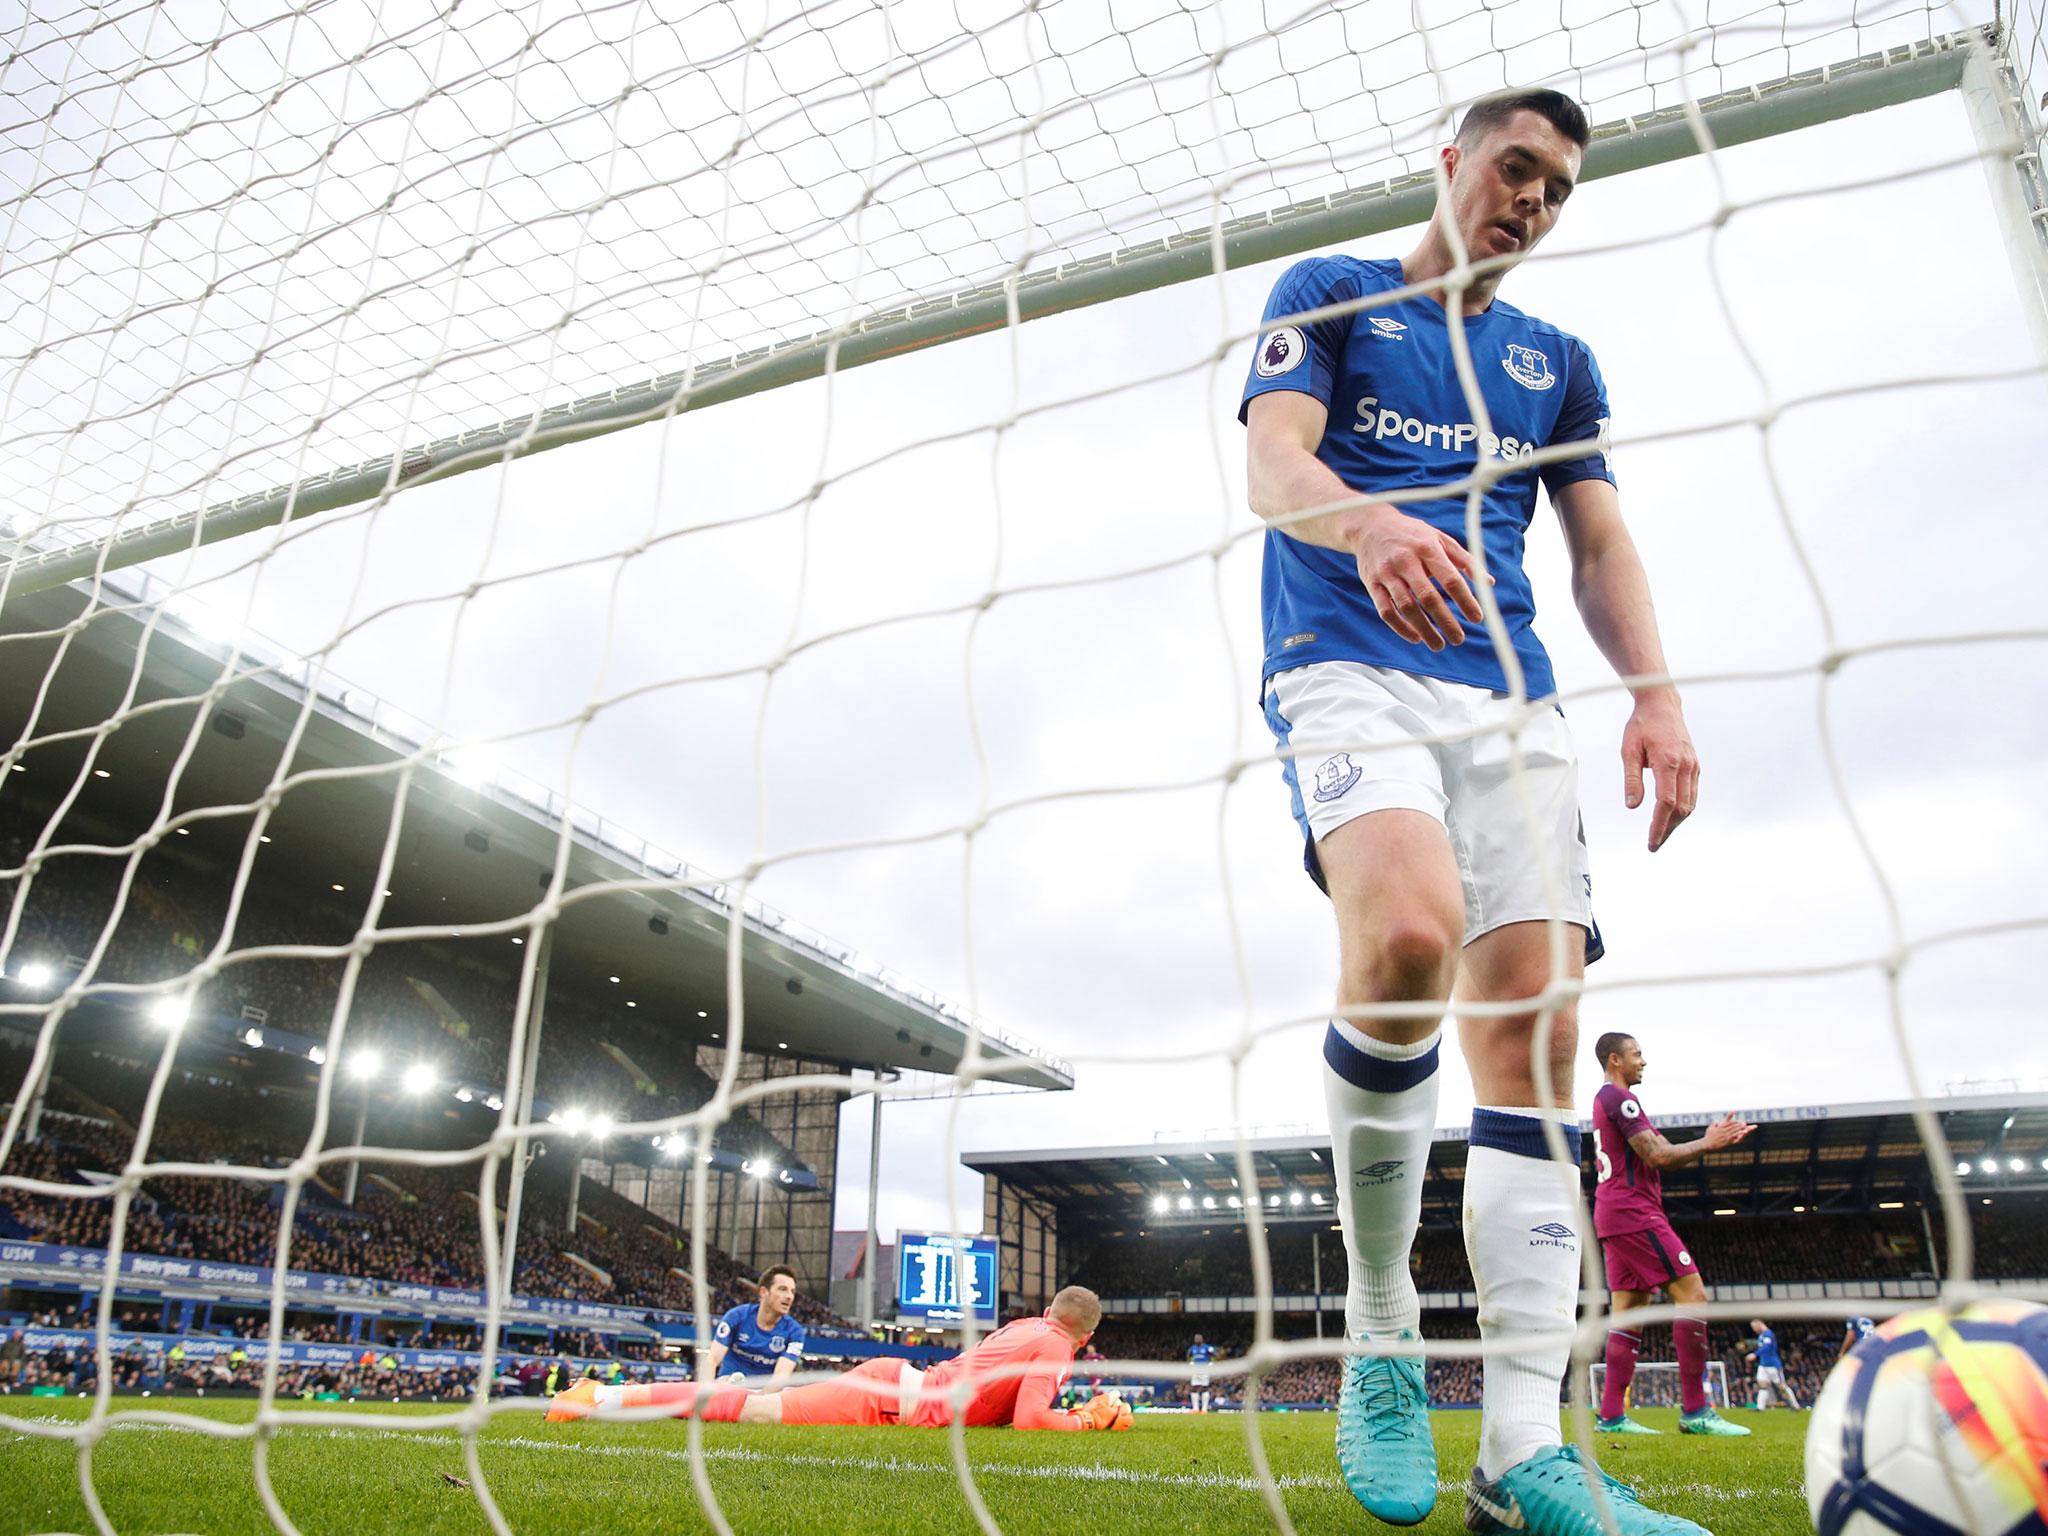 Everton put in a woeful performance at home (Getty)